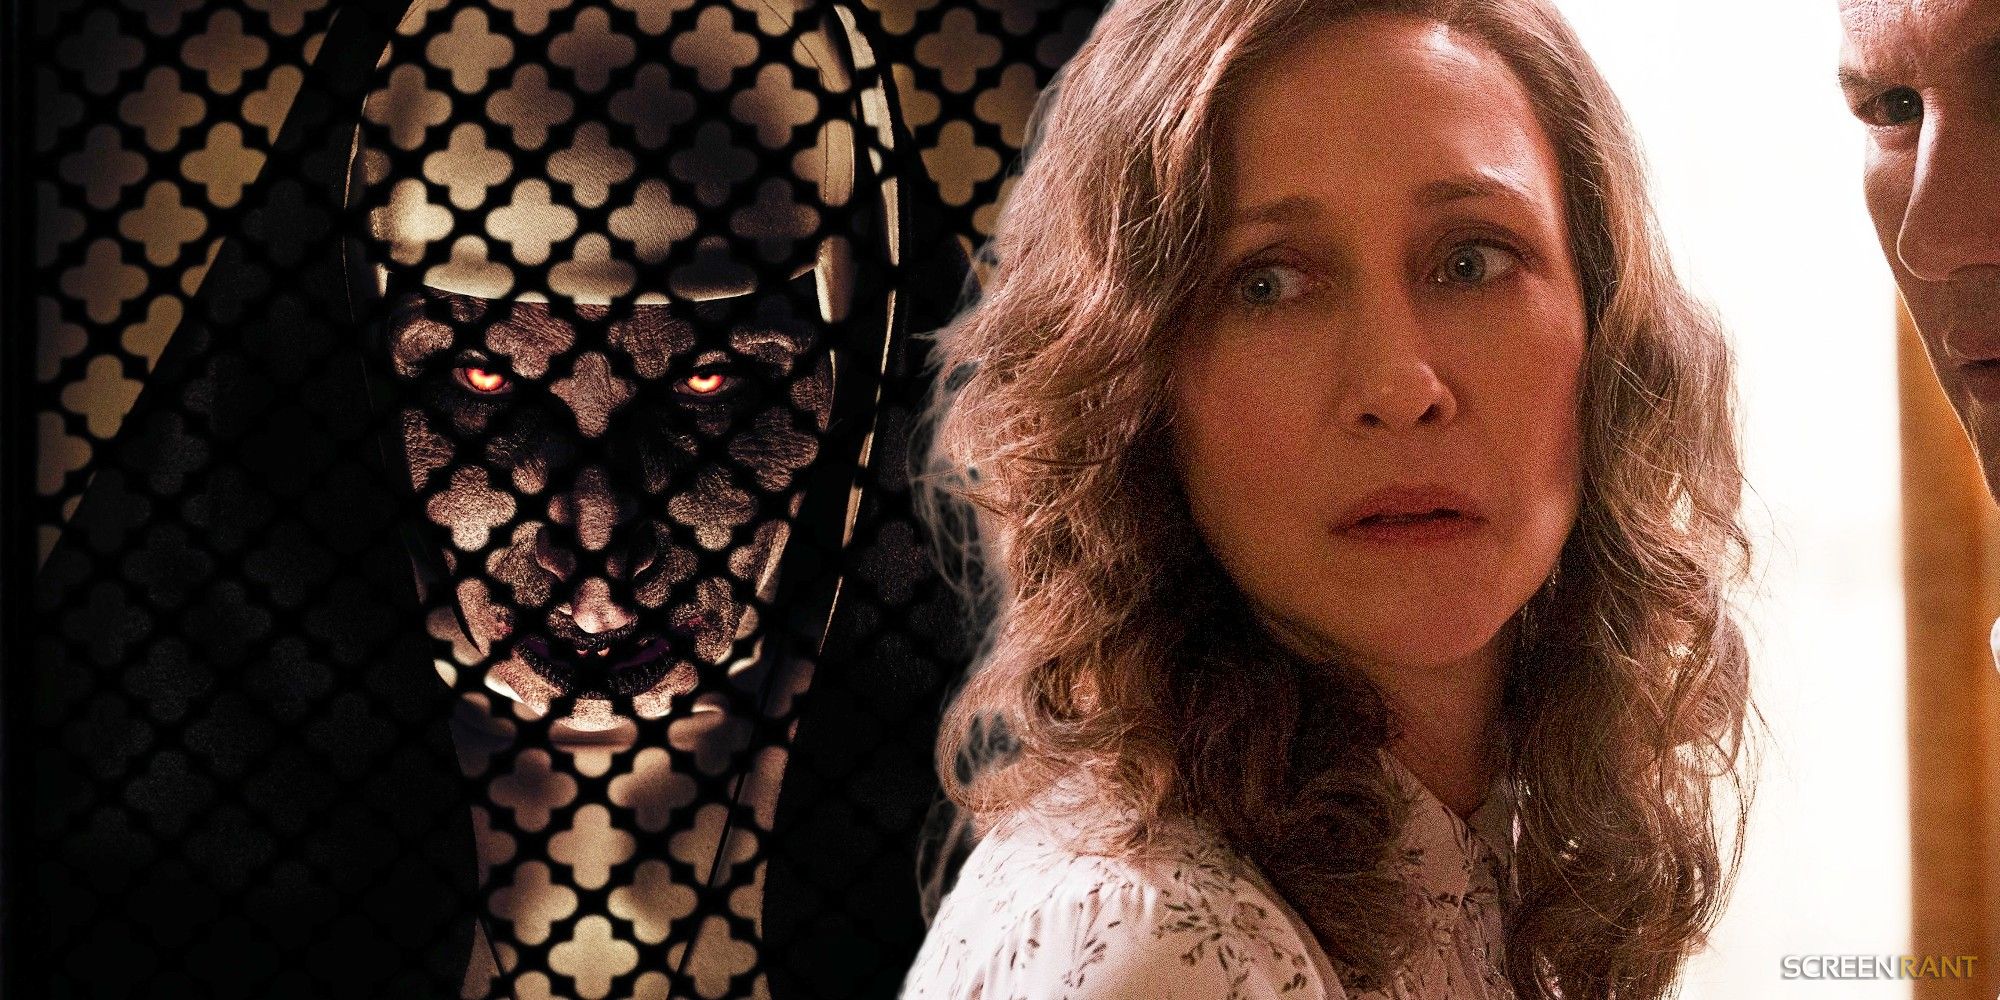 The Nun 2 Director Teases Possible Connection To The Conjuring 4: “There’s A Lot Of Fun Stuff In There”